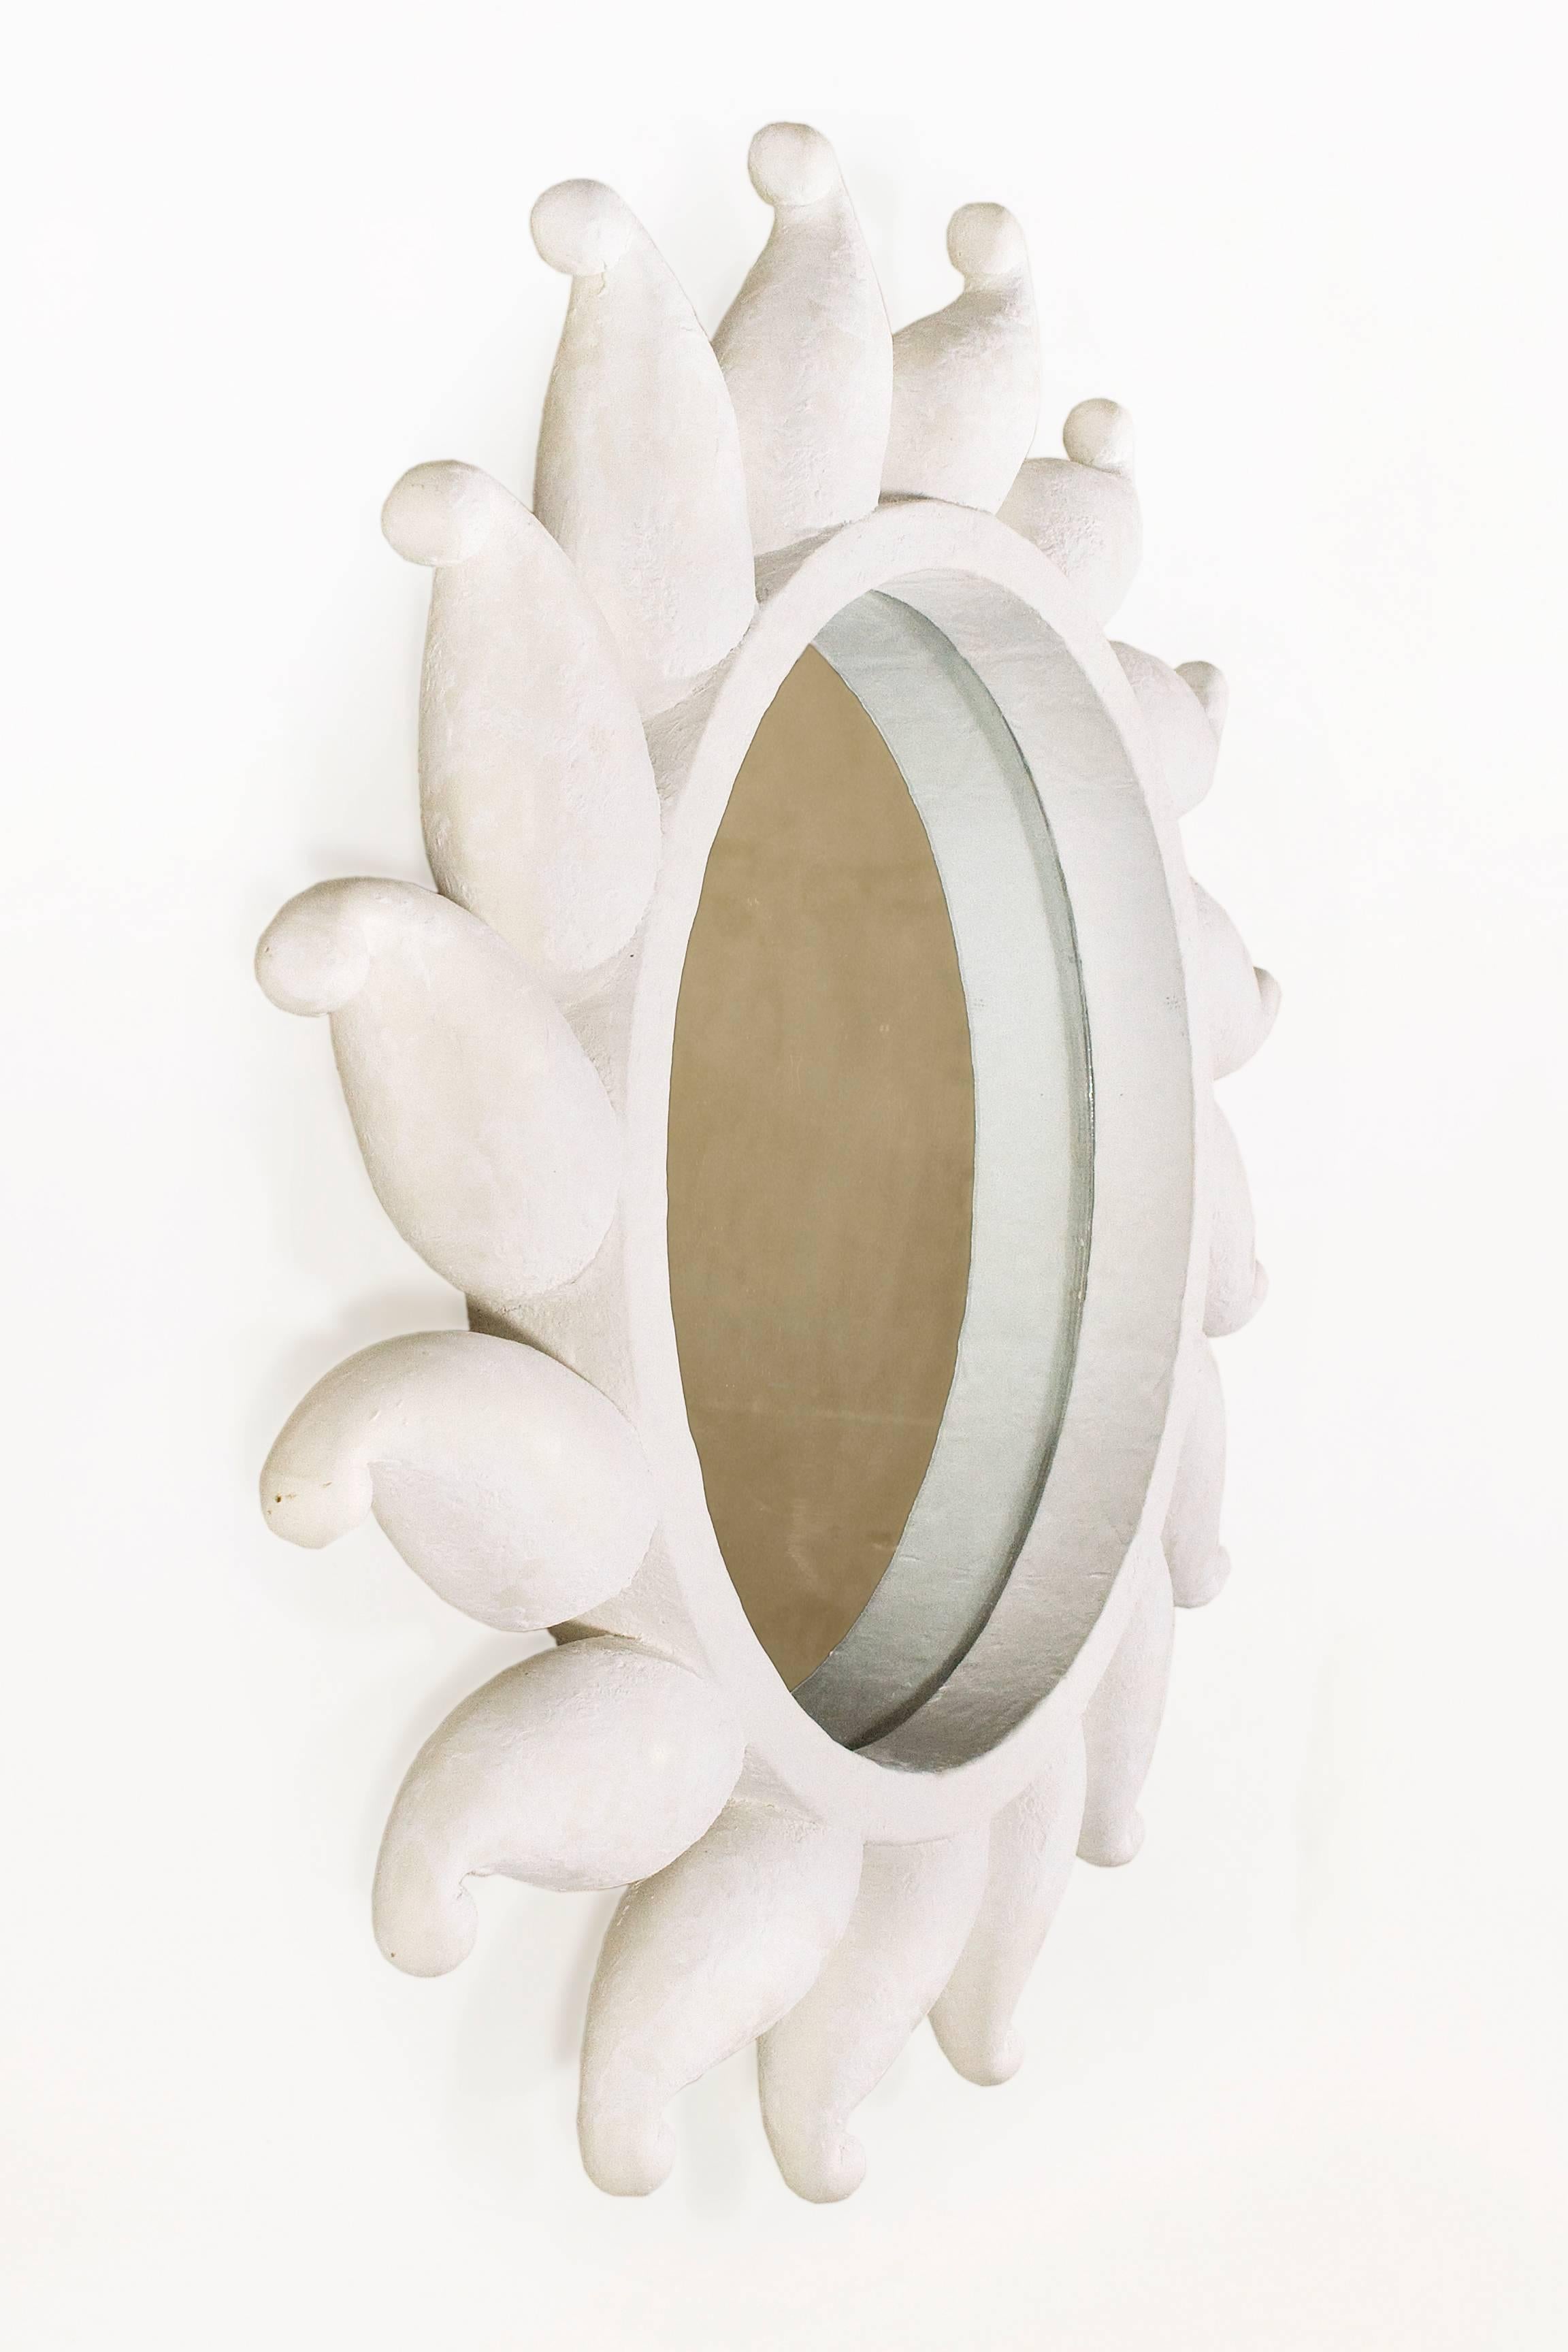 Jacques Darbaud plaster sunburst mirror.
Stylized and sculptural.
Plaster and mirror.
Signed,
France, circa 2015.
Very good condition.